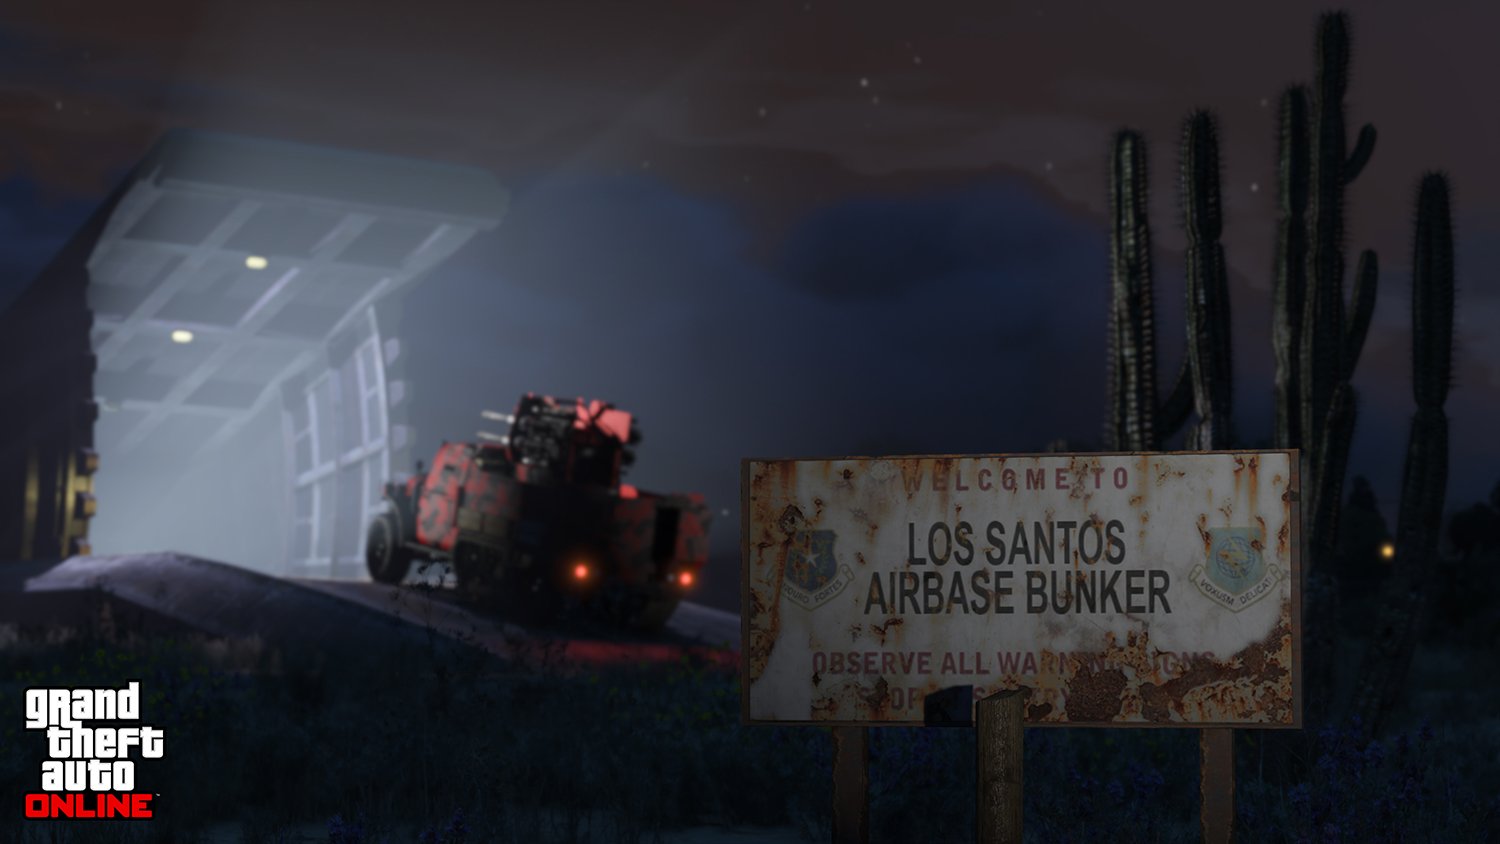 A truck heads into the Los Santos Airbase Bunker in GTA Online